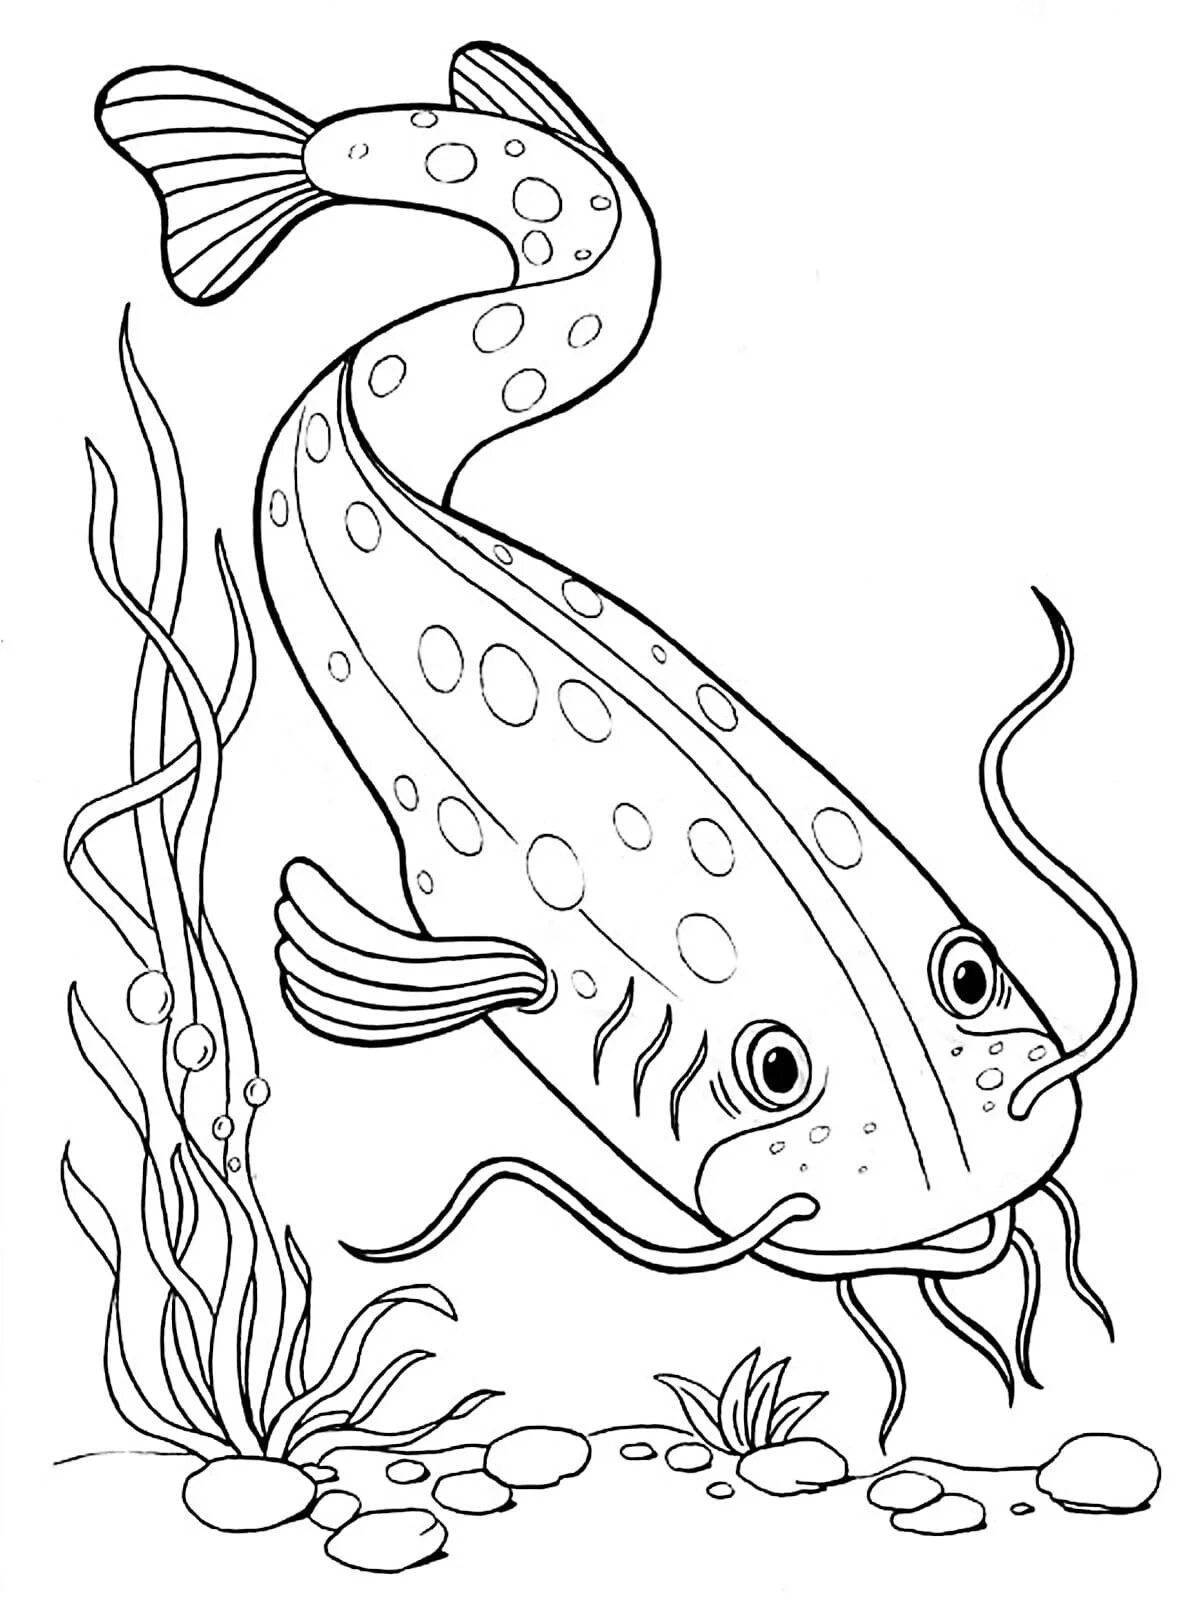 Coloring page dazzling river fish